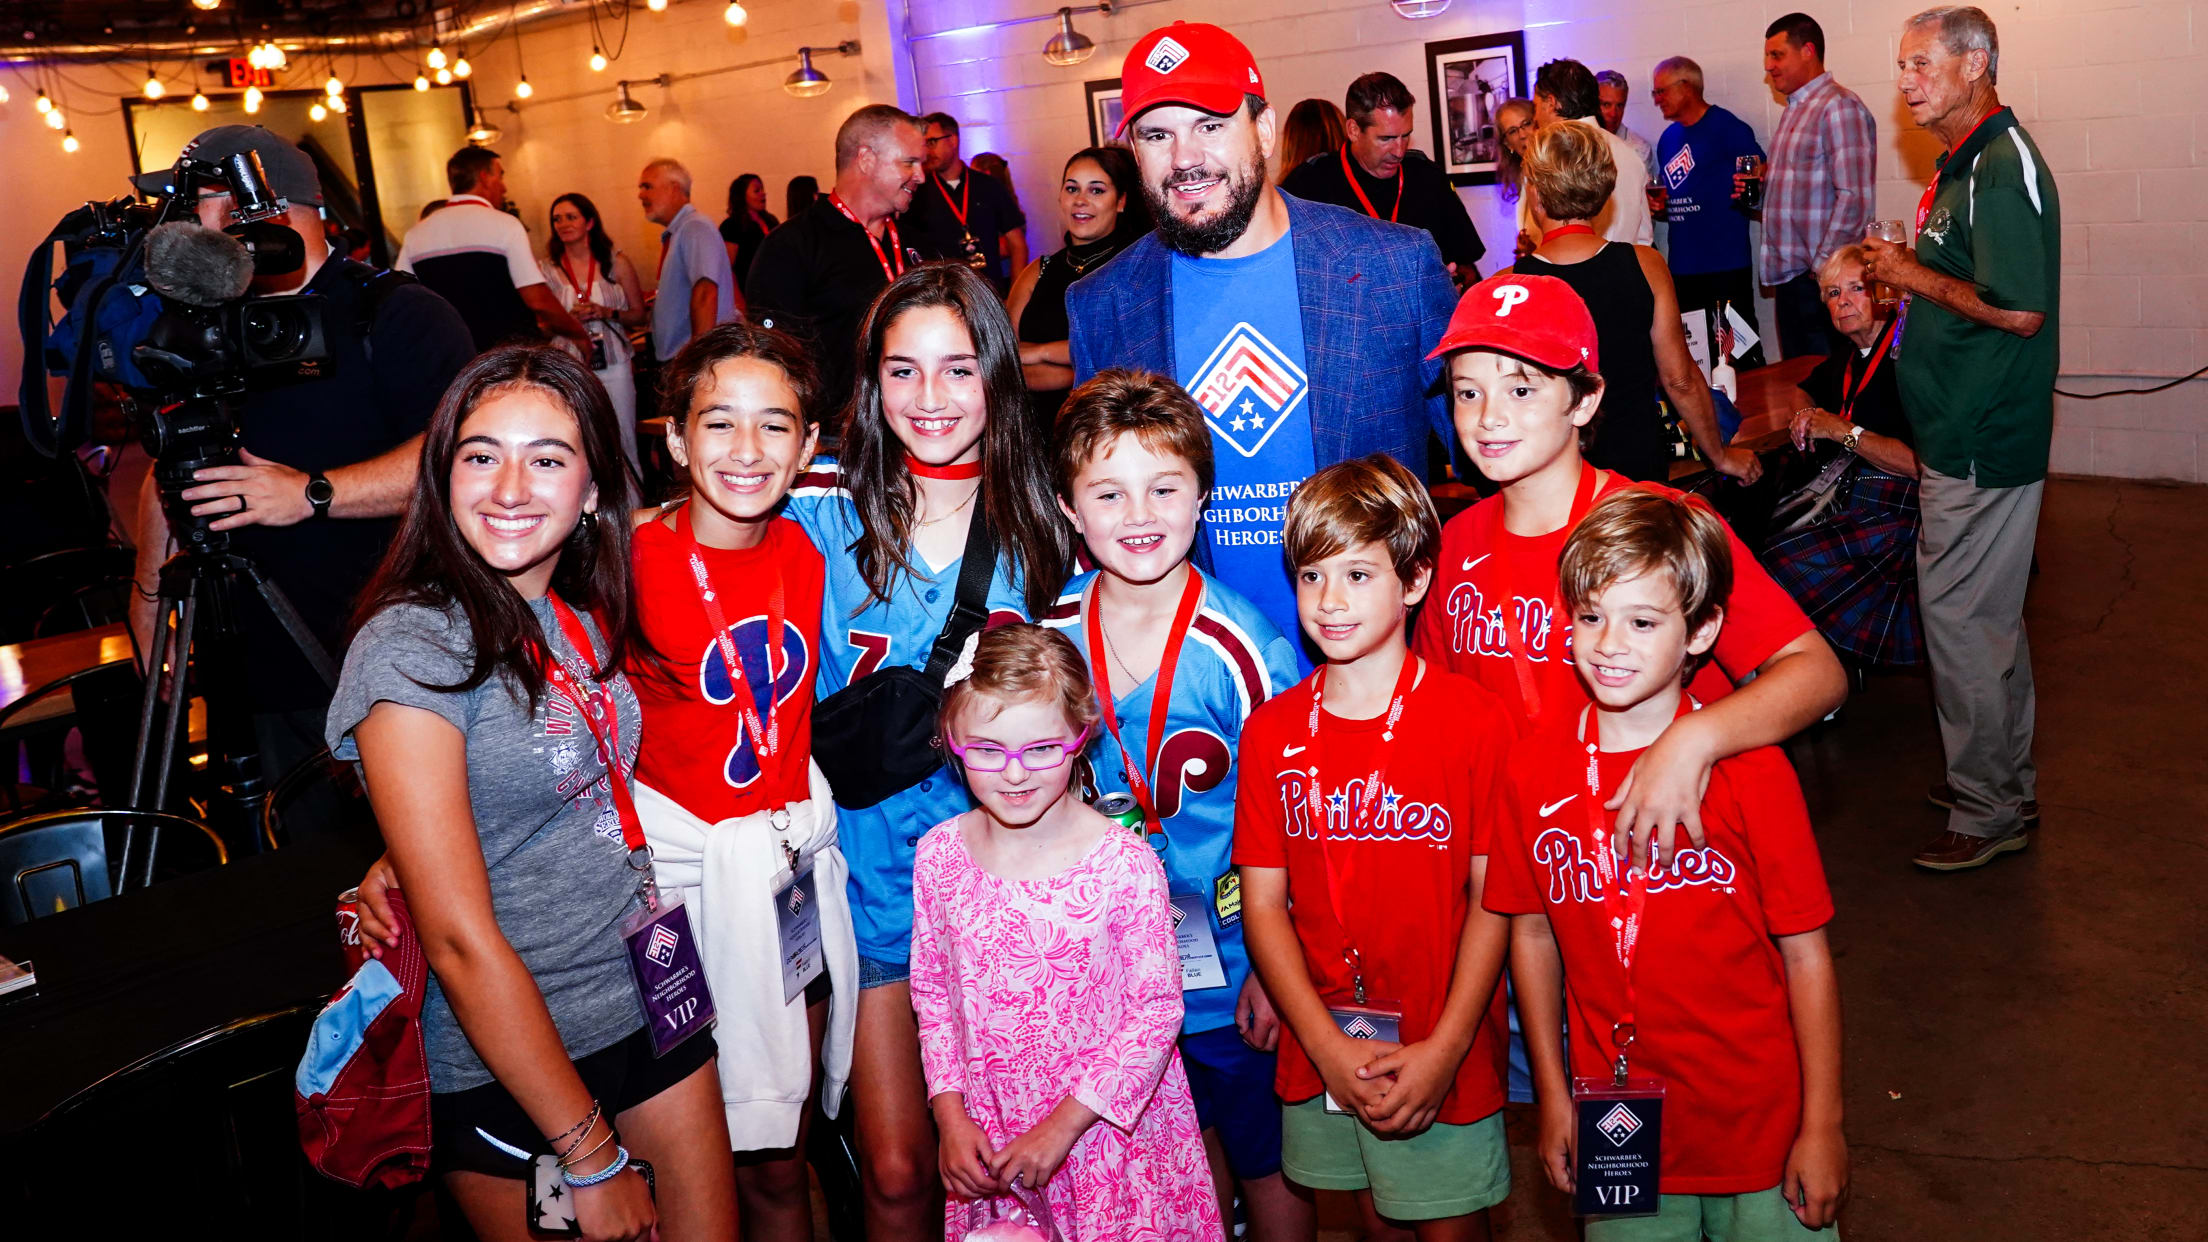 More Than $300,000 Raised for Neighborhood Heroes at Kyle Schwarber's Block  Party